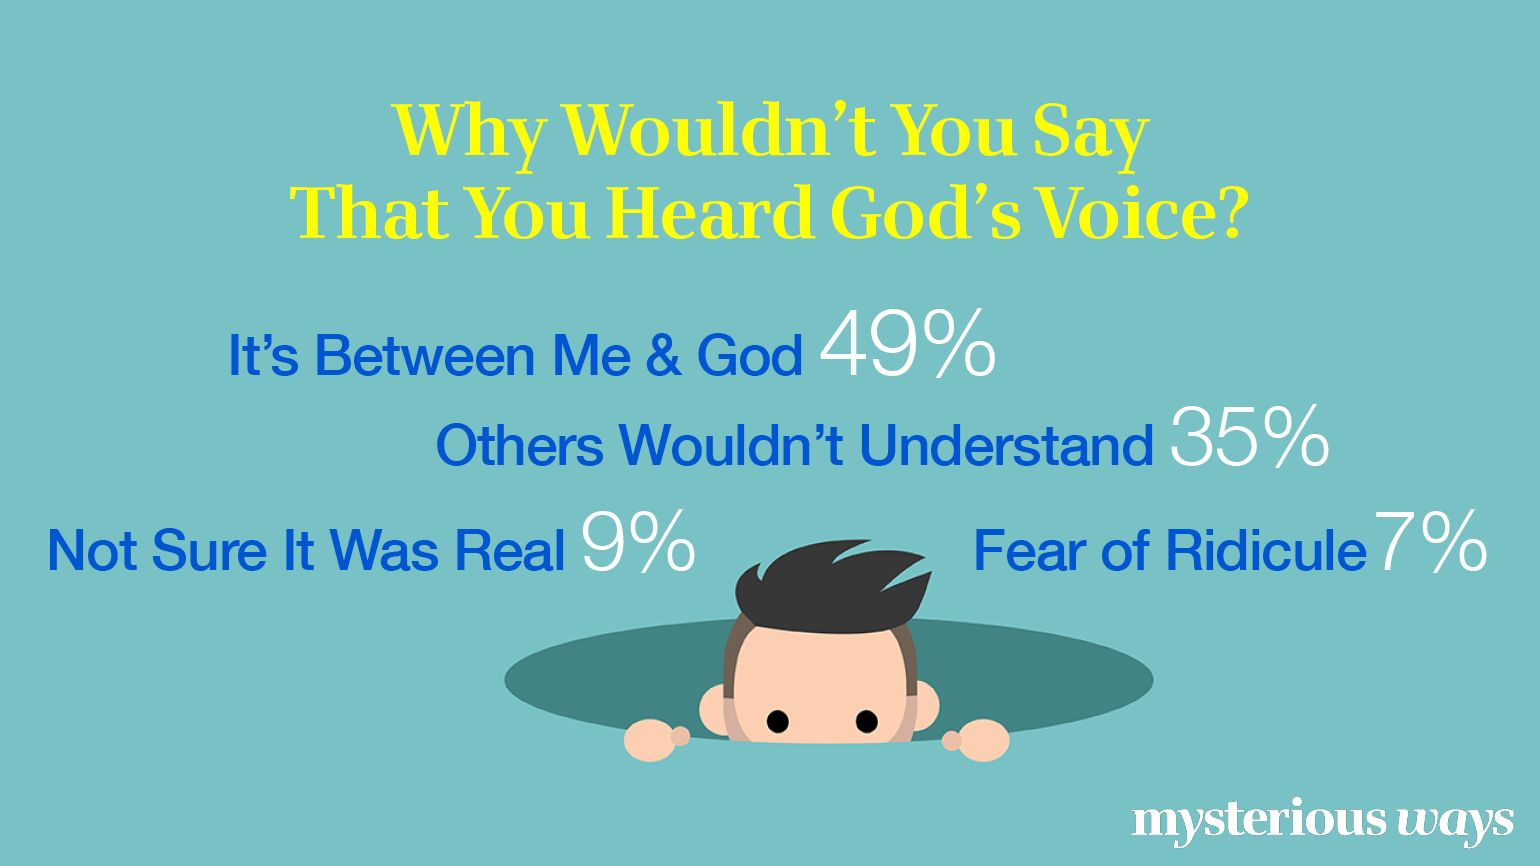 Why Wouldn't You Say That You Heard God's Voice? Why Be Shy?